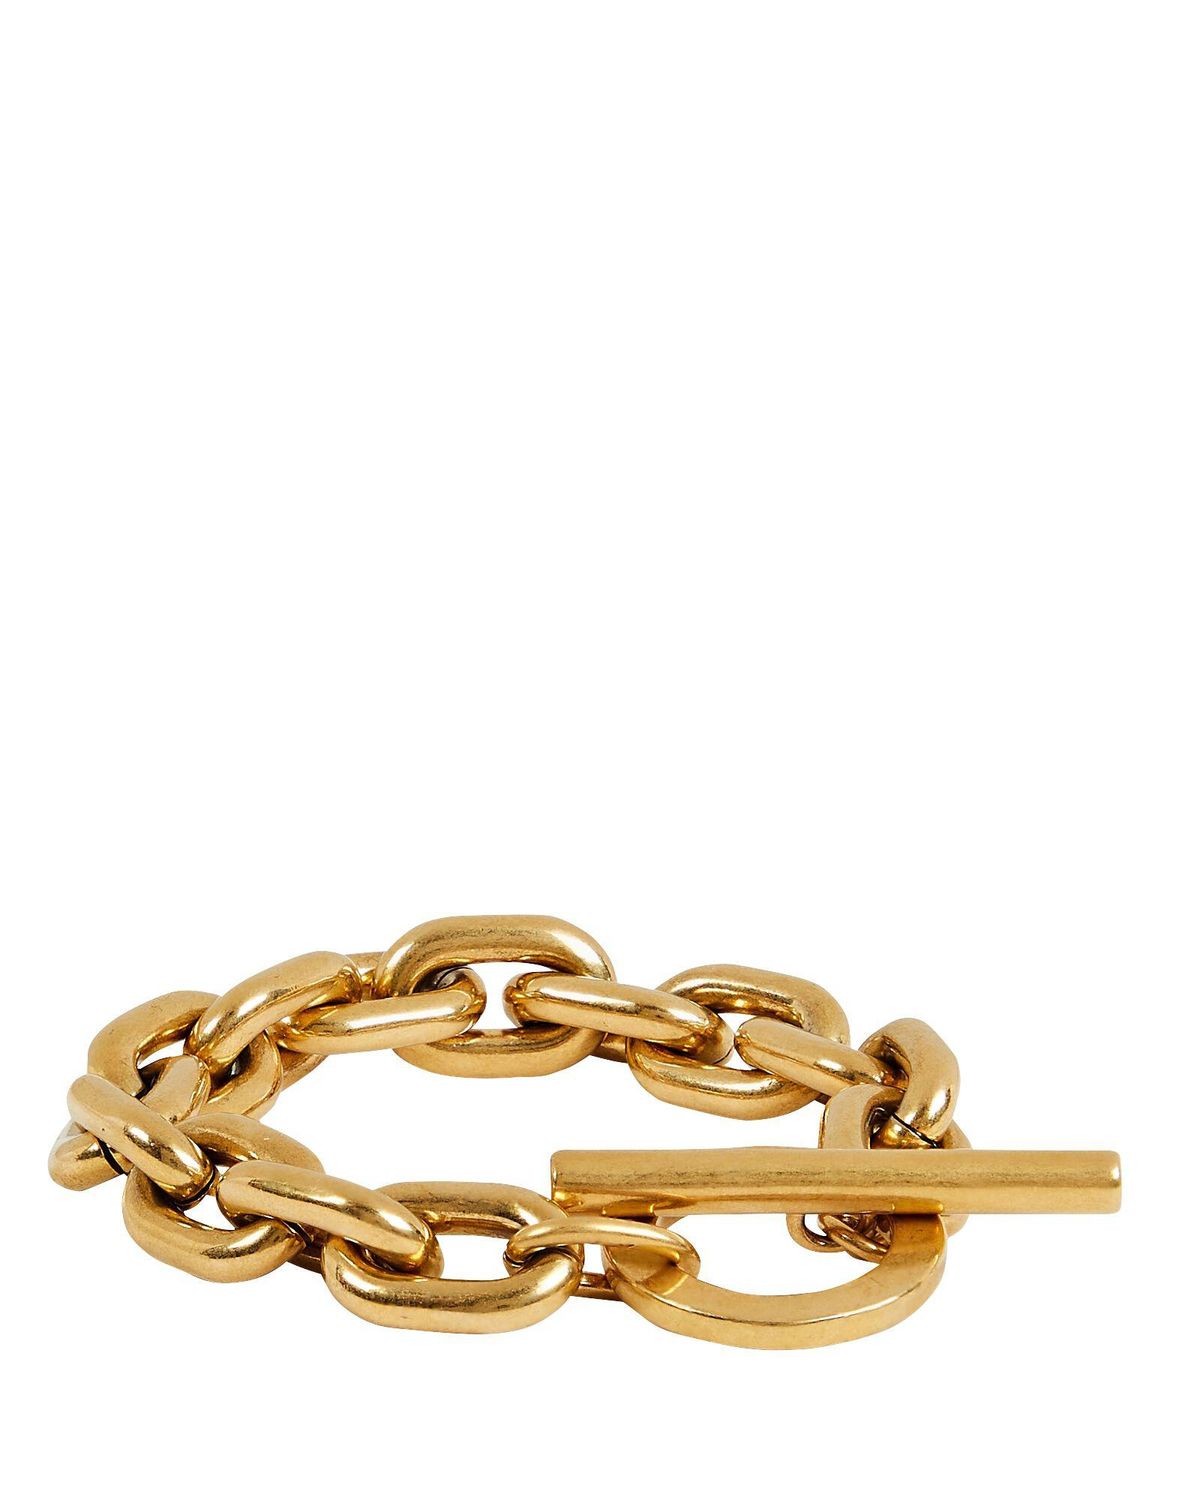 The Gold Chain-Link Toggle Bracelet